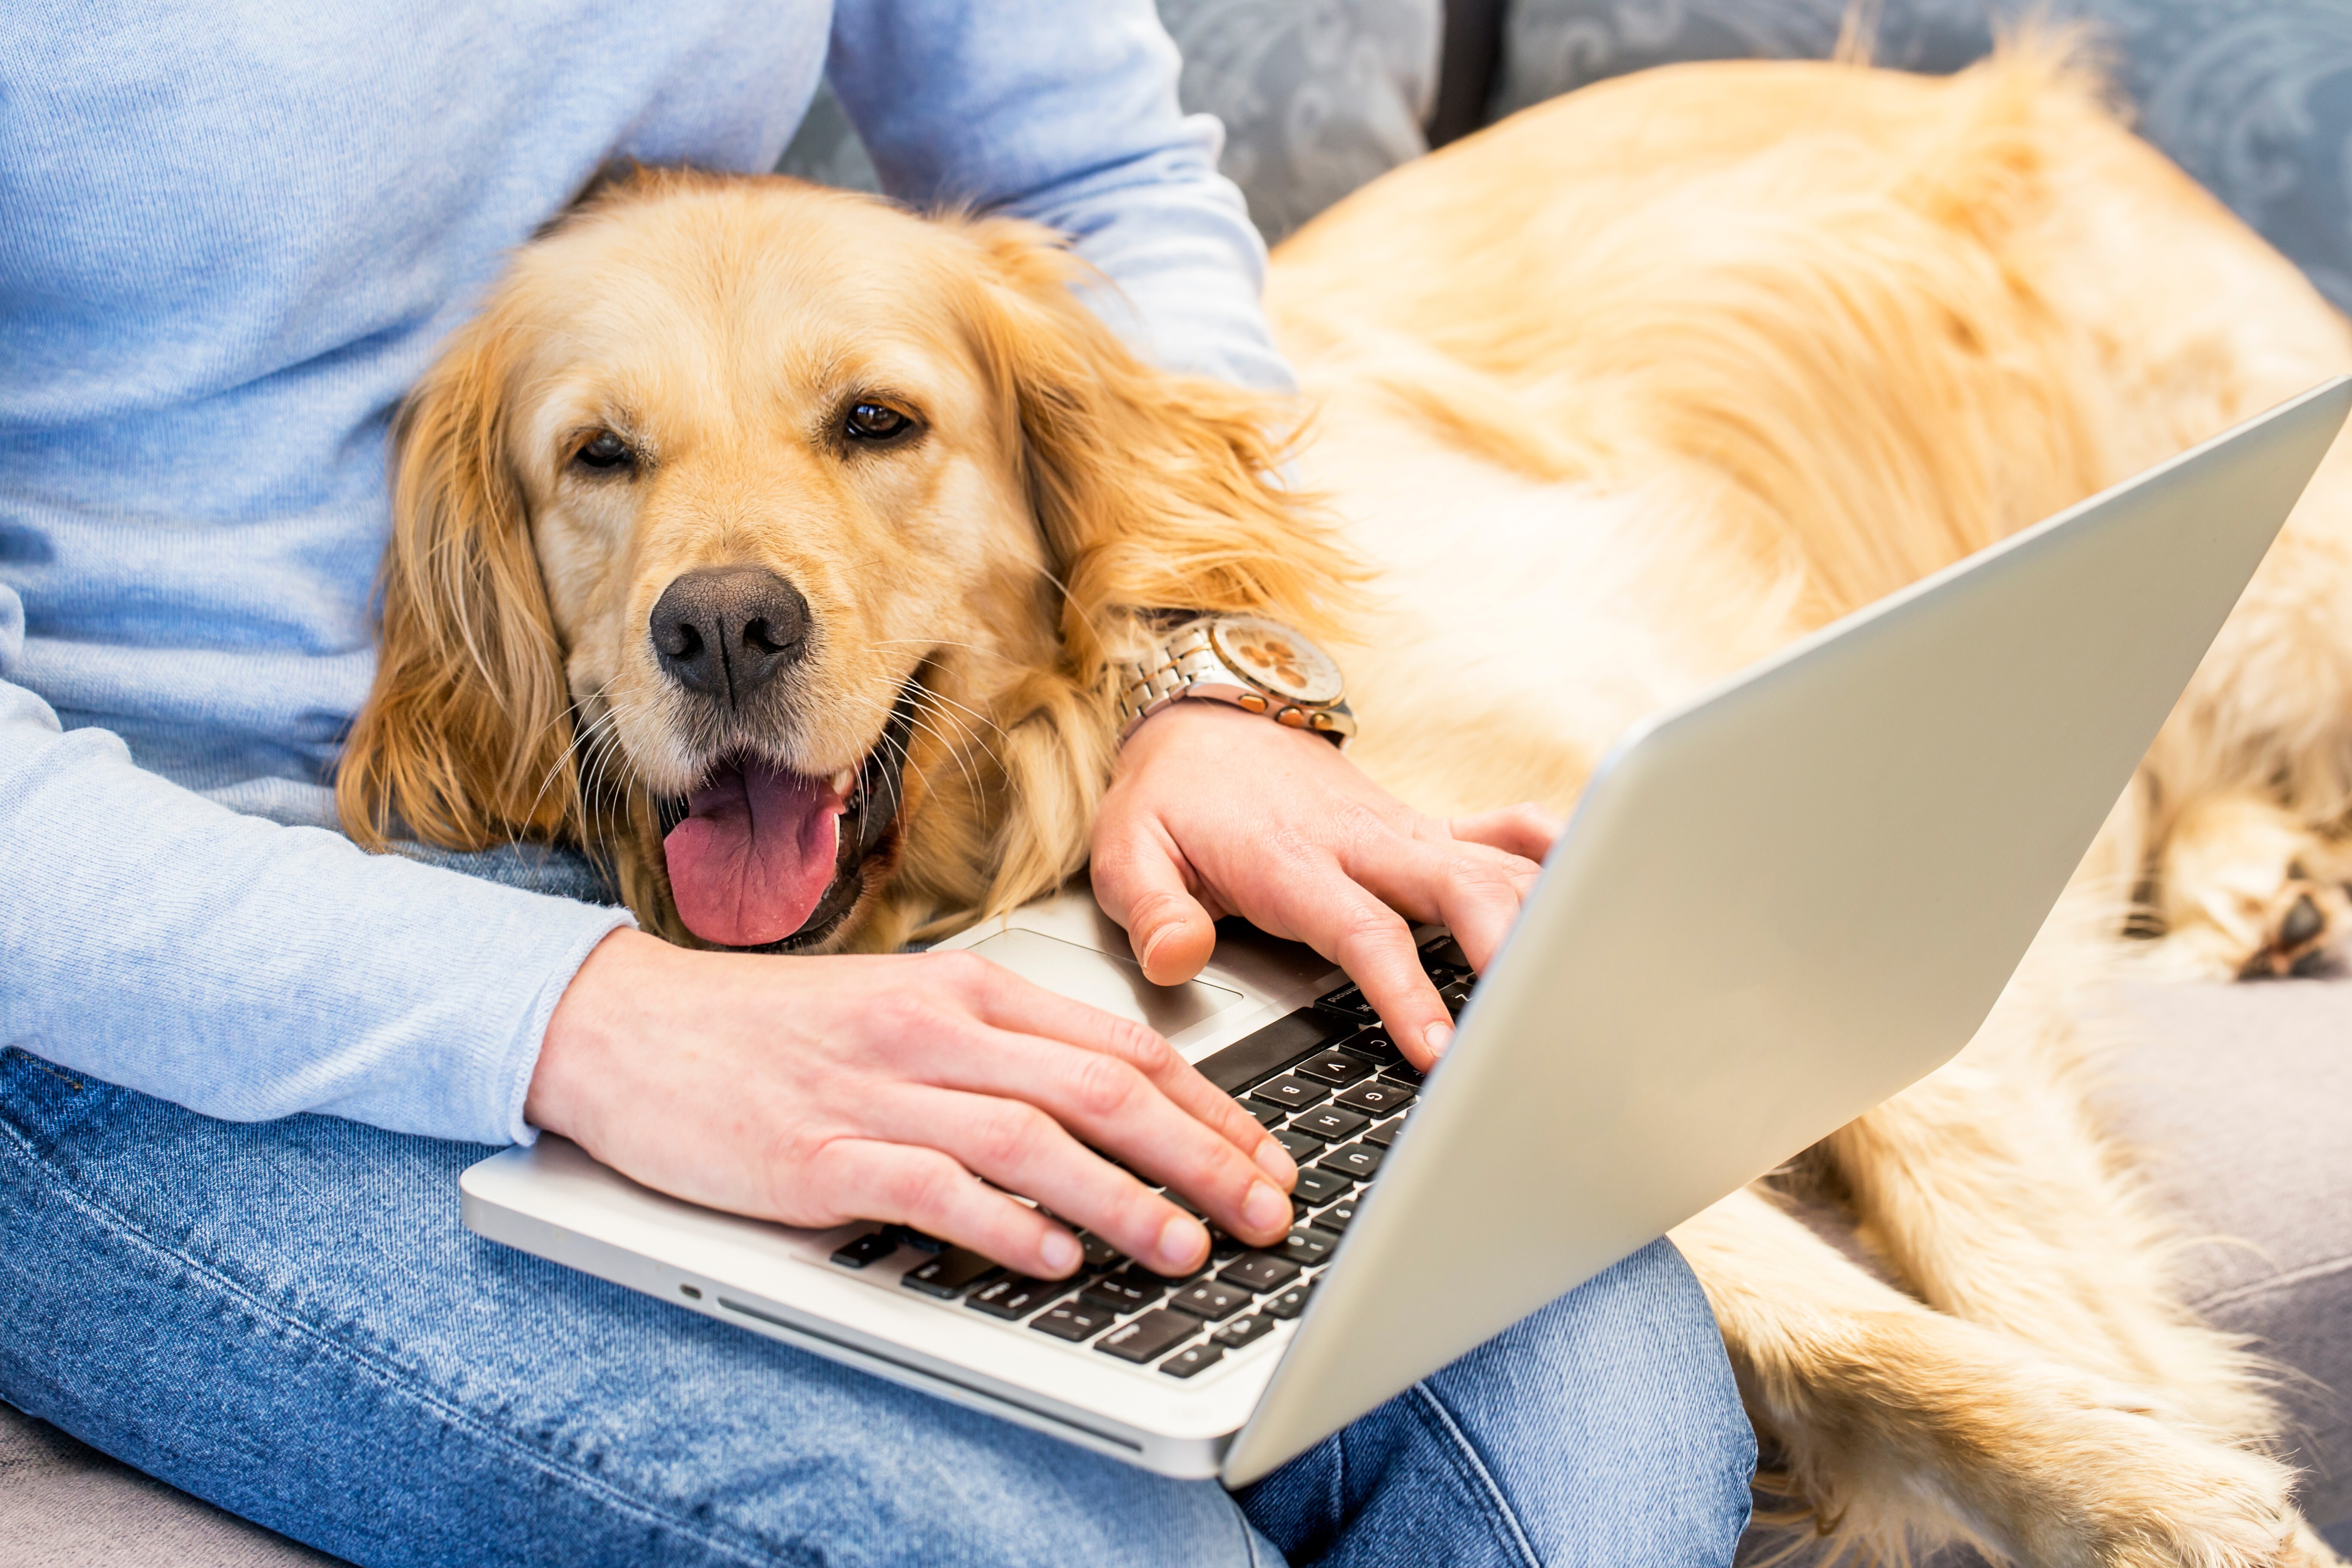 Woman typing on laptop while dog lays in her lap. [FEATURES HEALTH] CREDIT: SHUTTERSTOCK